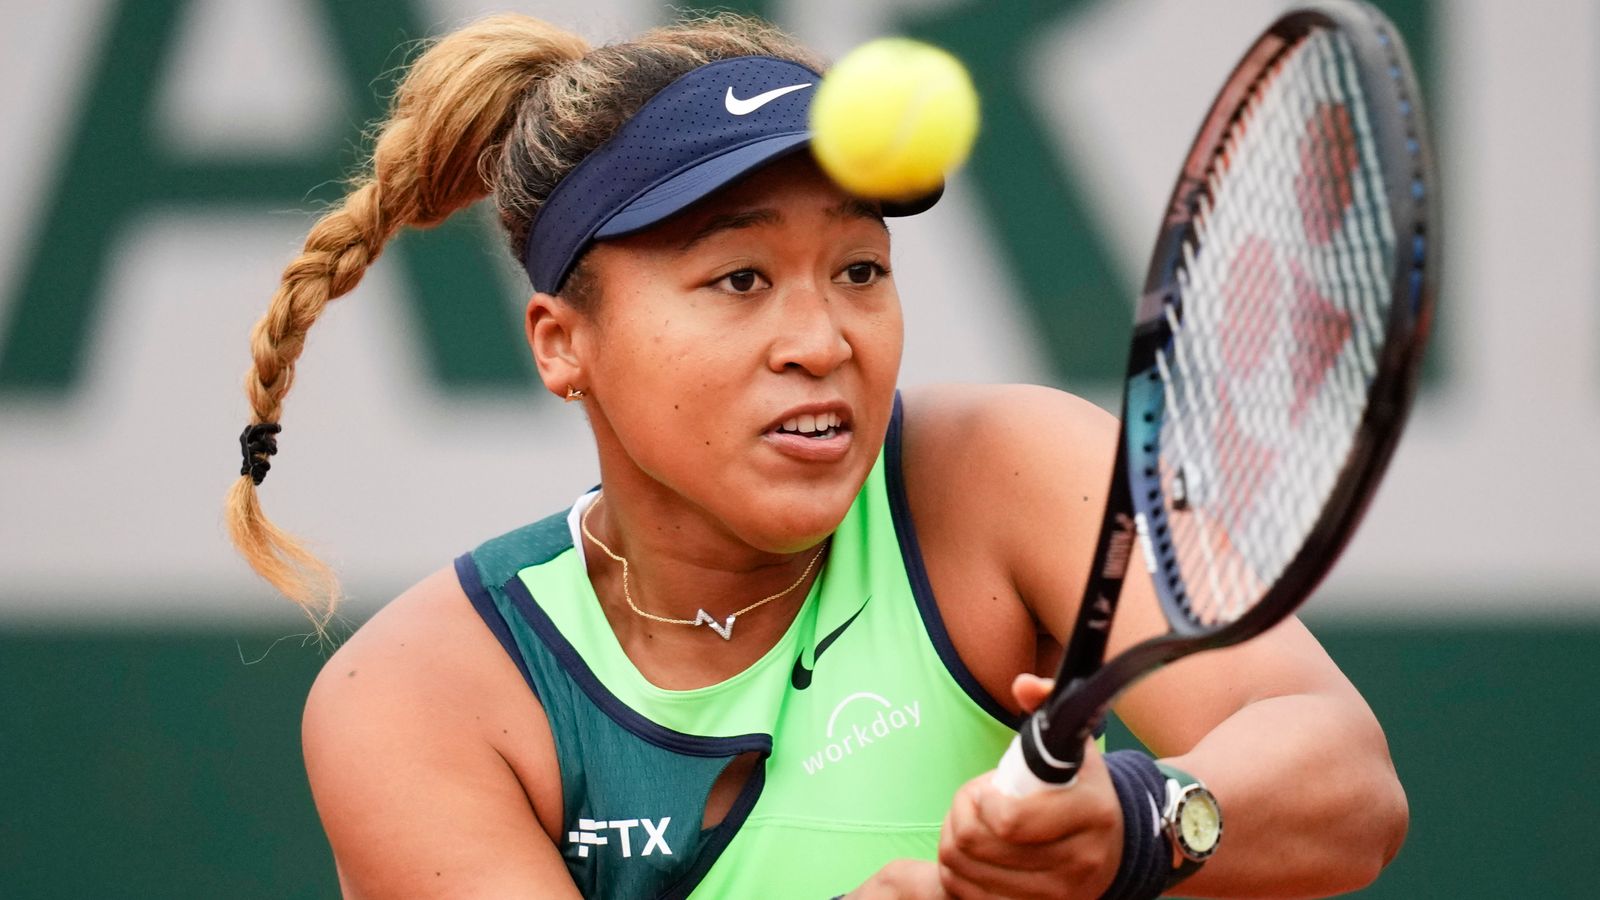 Wimbledon: Naomi Osaka on entry list; Roger Federer and Williams sisters absent